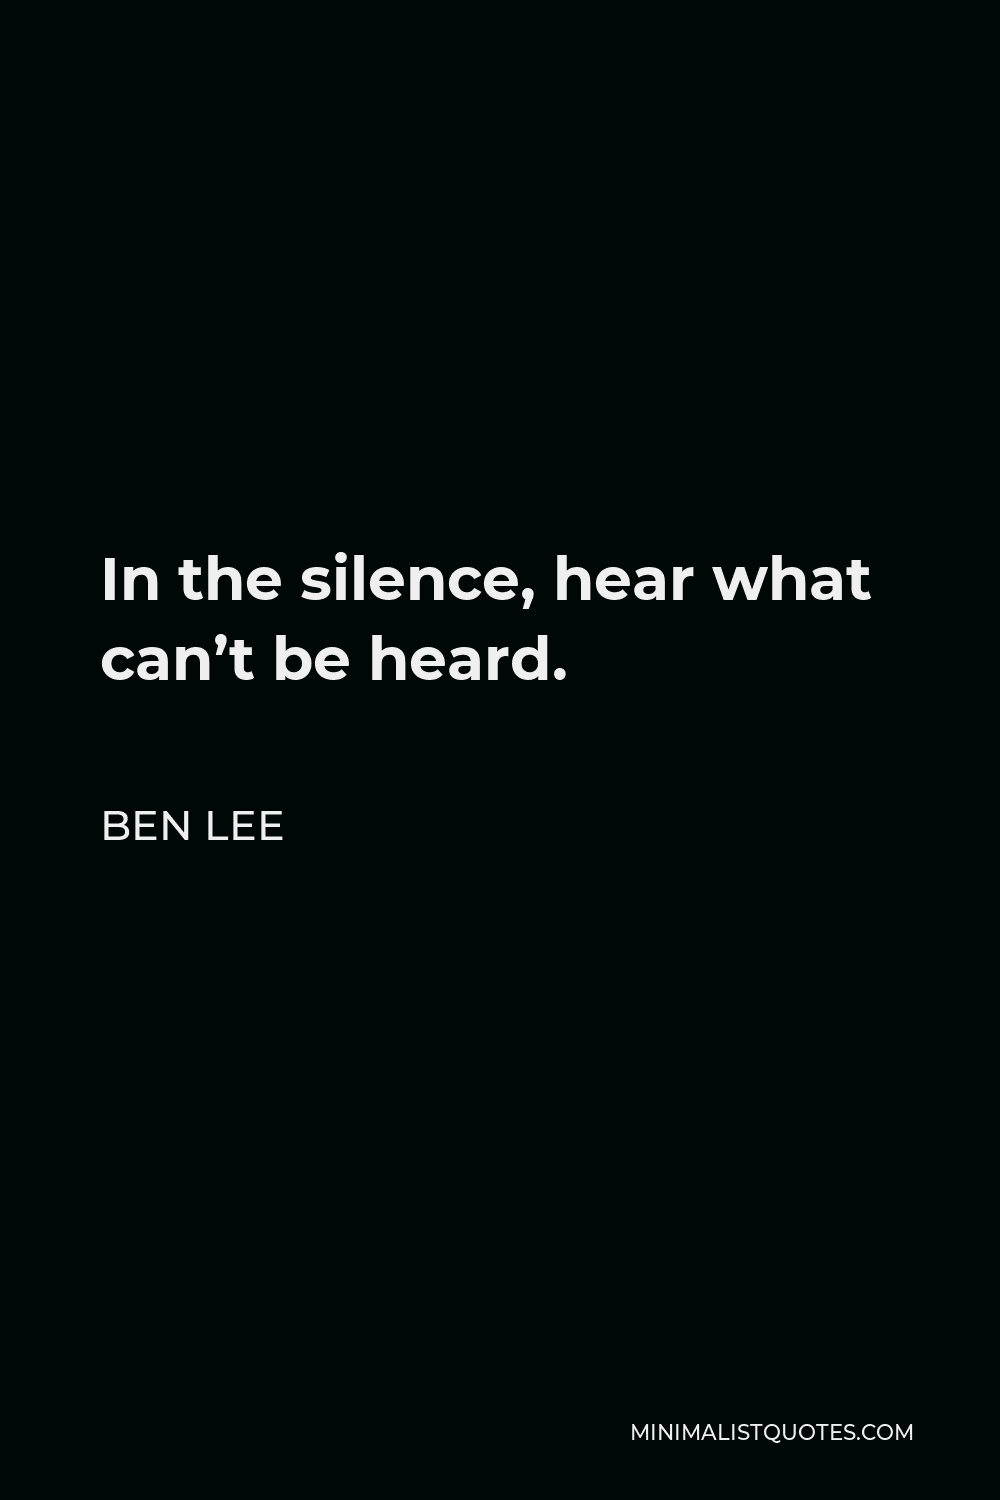 Ben Lee Quote - In the silence, hear what can’t be heard.